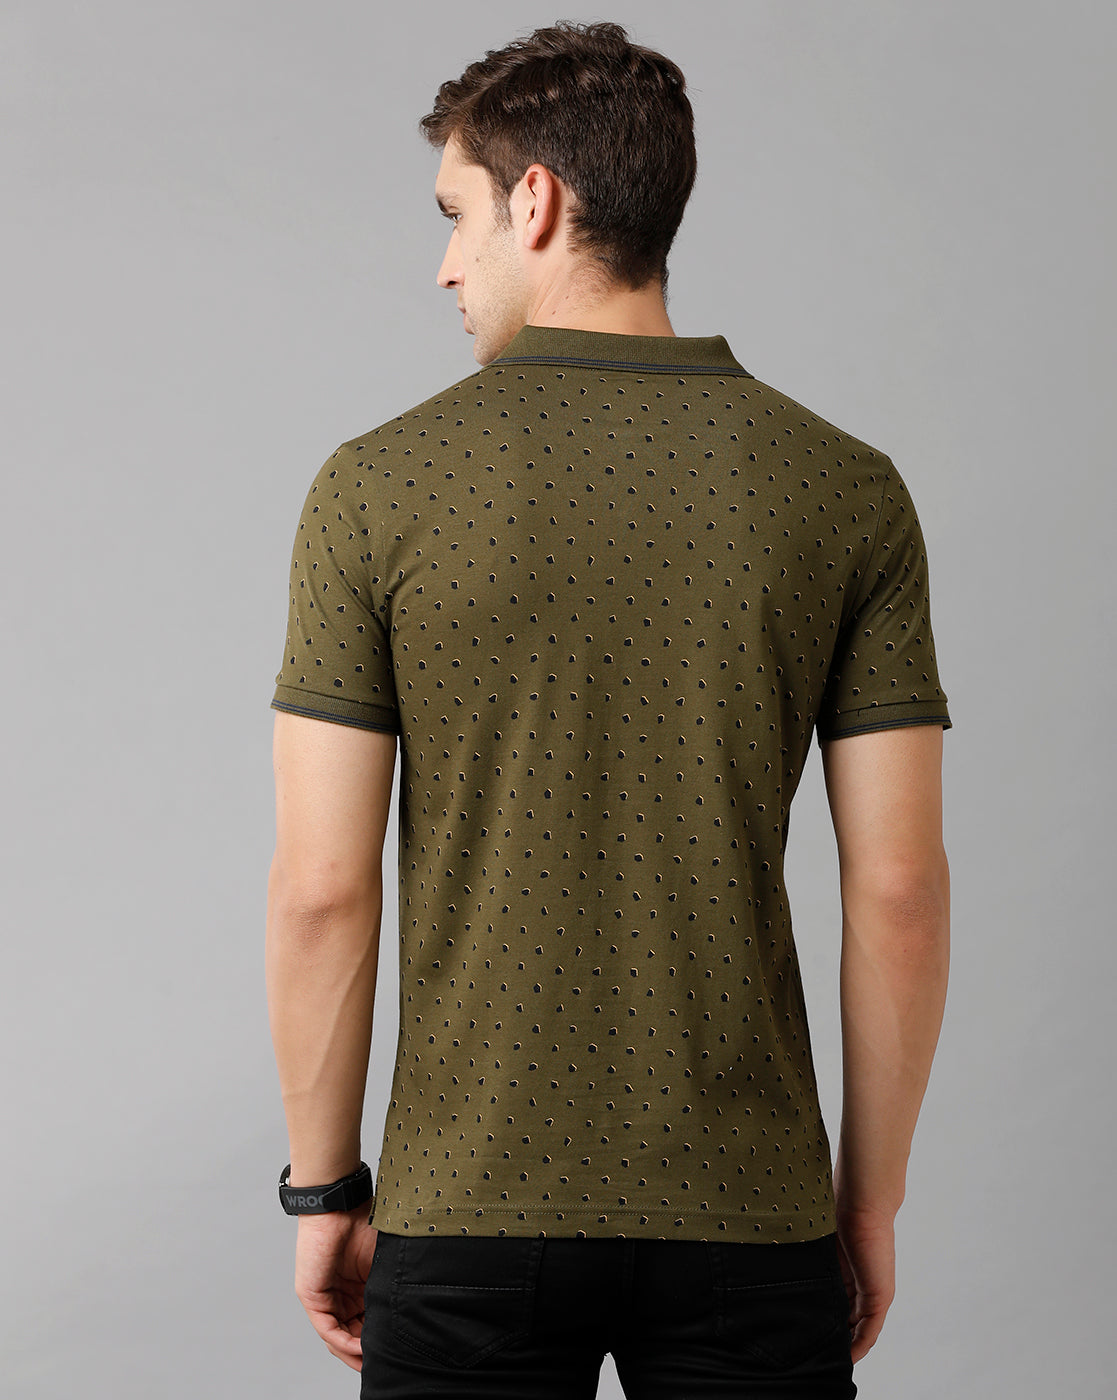 Classic Polo Mens Cotton Printed Half Sleeve Slim Fit Polo Neck Green Color T-Shirt | Bello 181 B